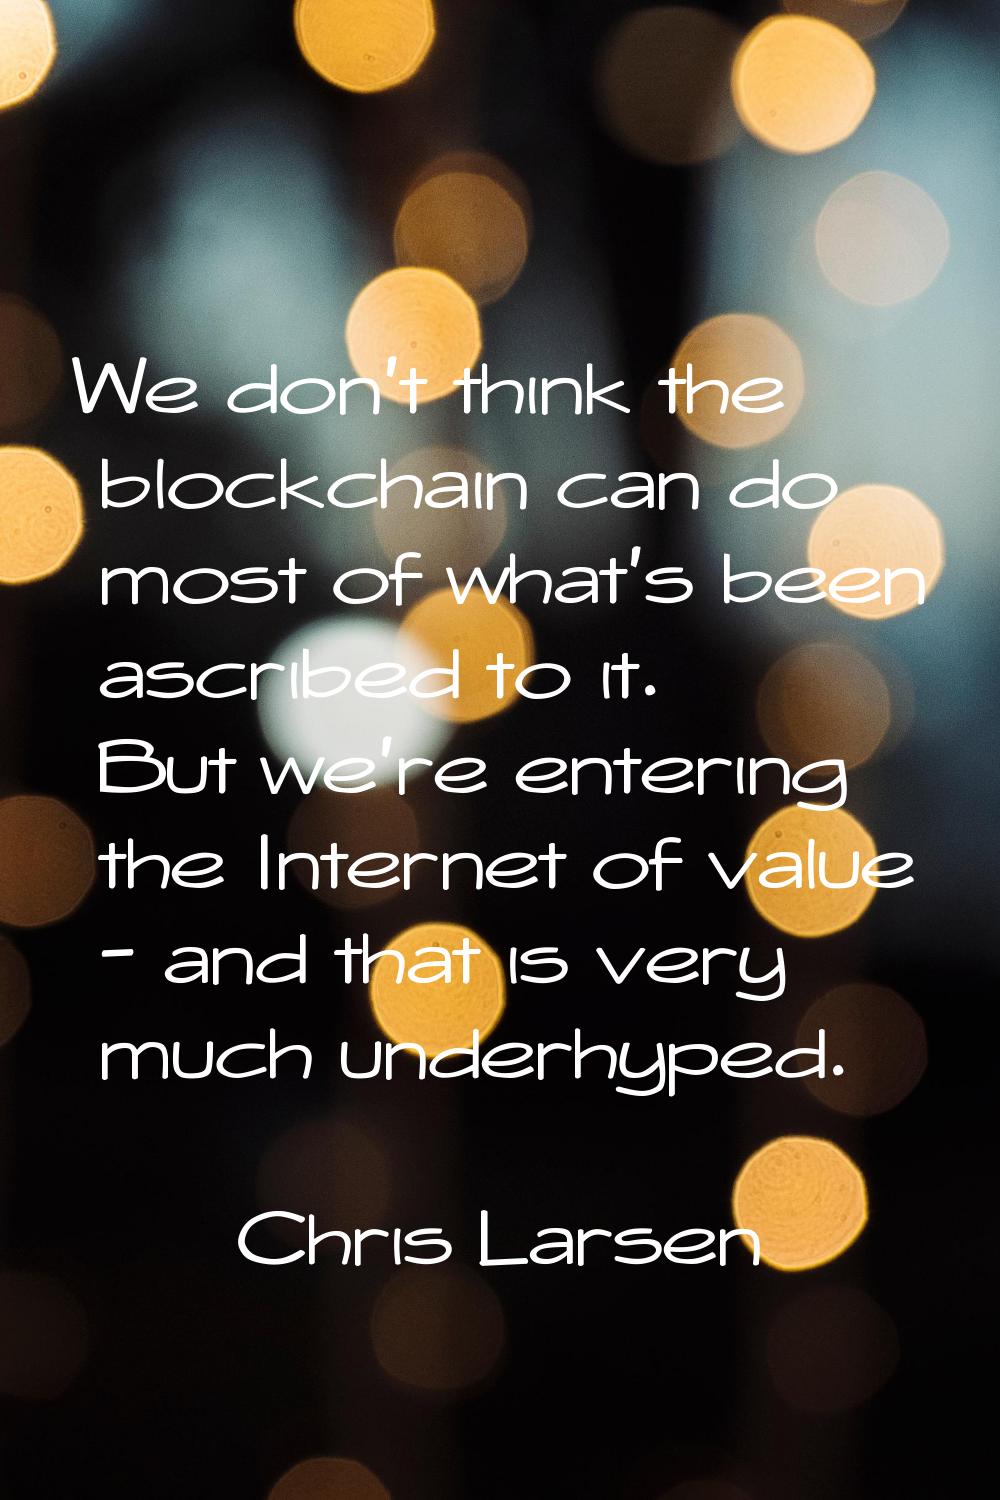 We don't think the blockchain can do most of what's been ascribed to it. But we're entering the Int